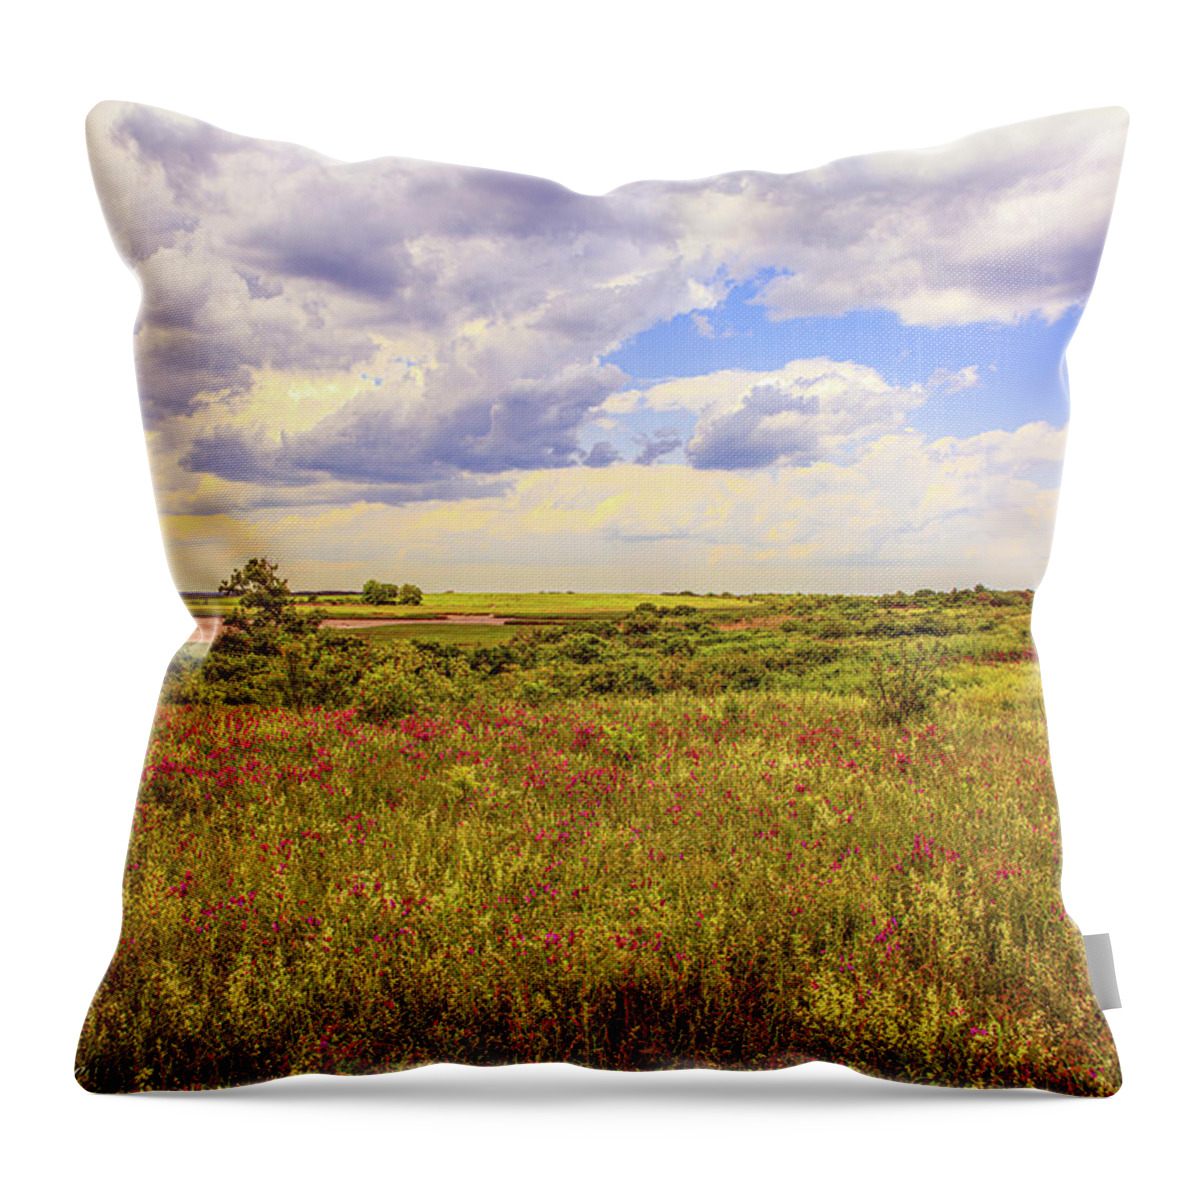 Plum Island Throw Pillow featuring the photograph Parker River National Wildlife Refuge by David Lee